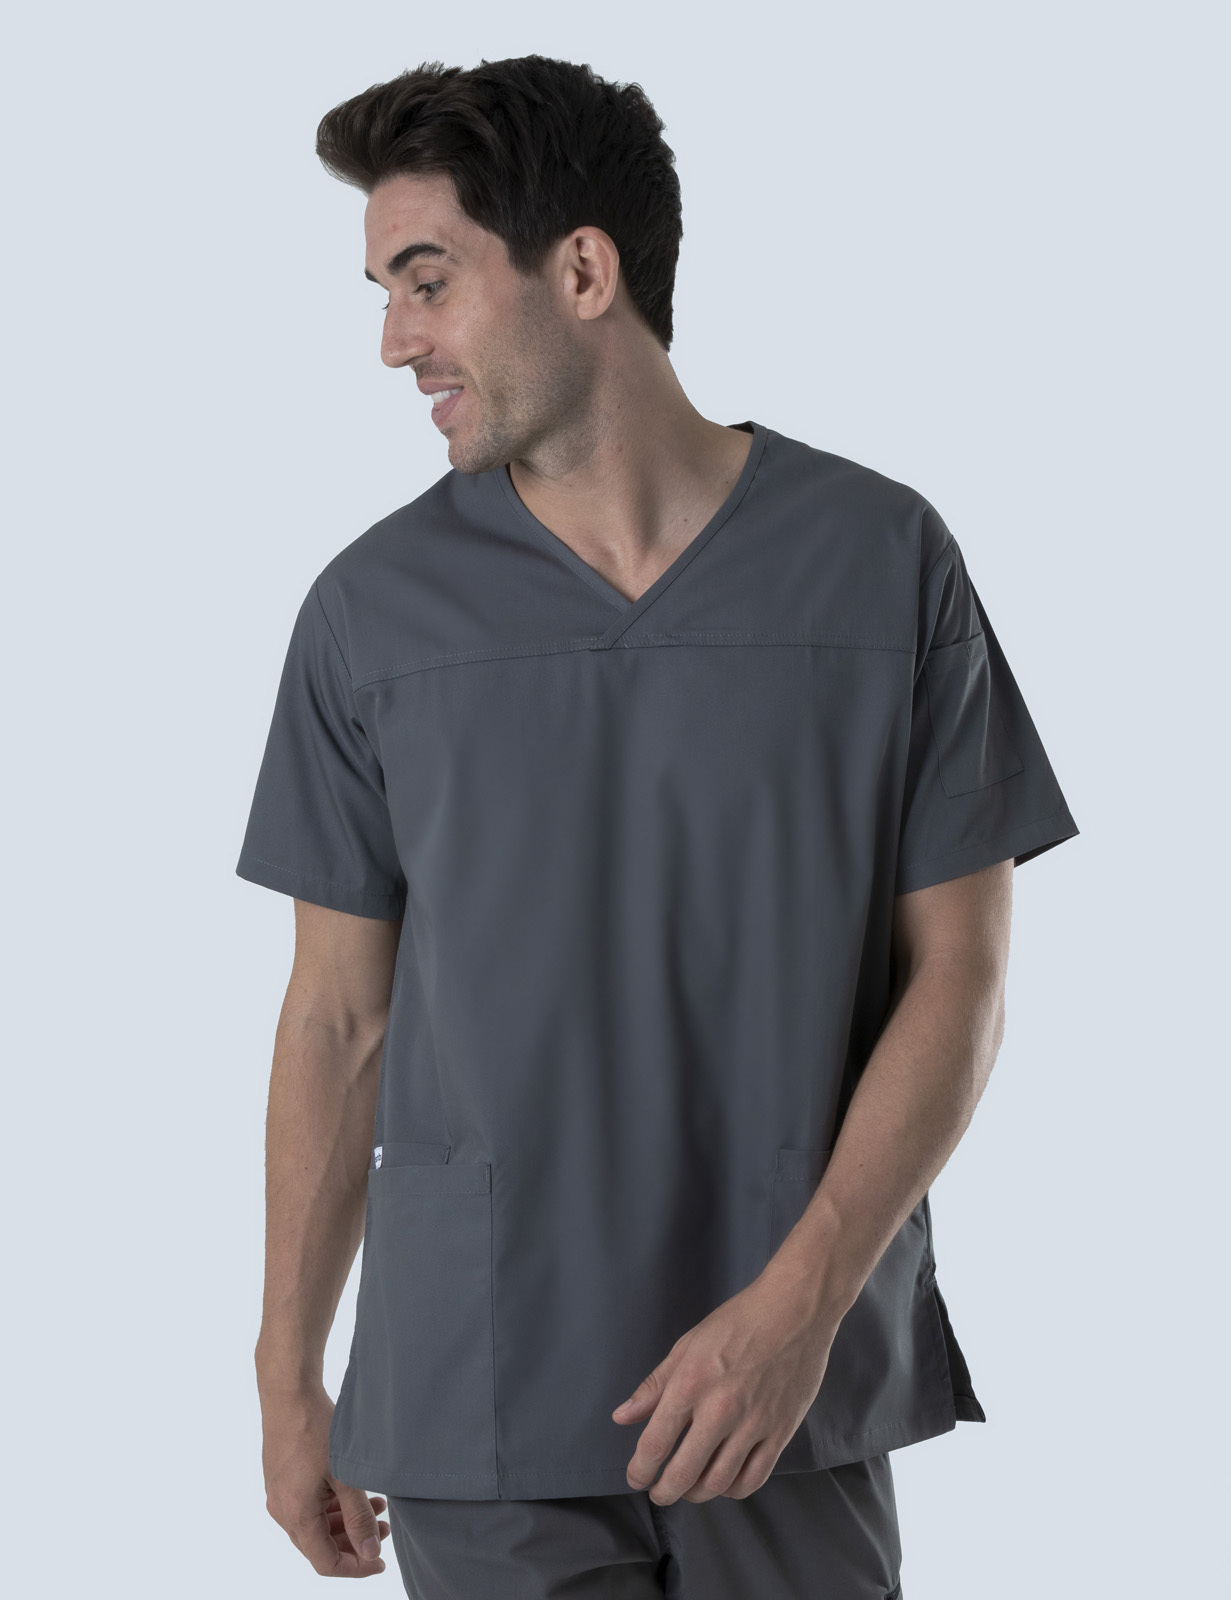 North Shore Private Hospital Imaging Assistant Uniform Top Only Bundle (Men's Fit Solid  Top in Steel Grey + Logo)